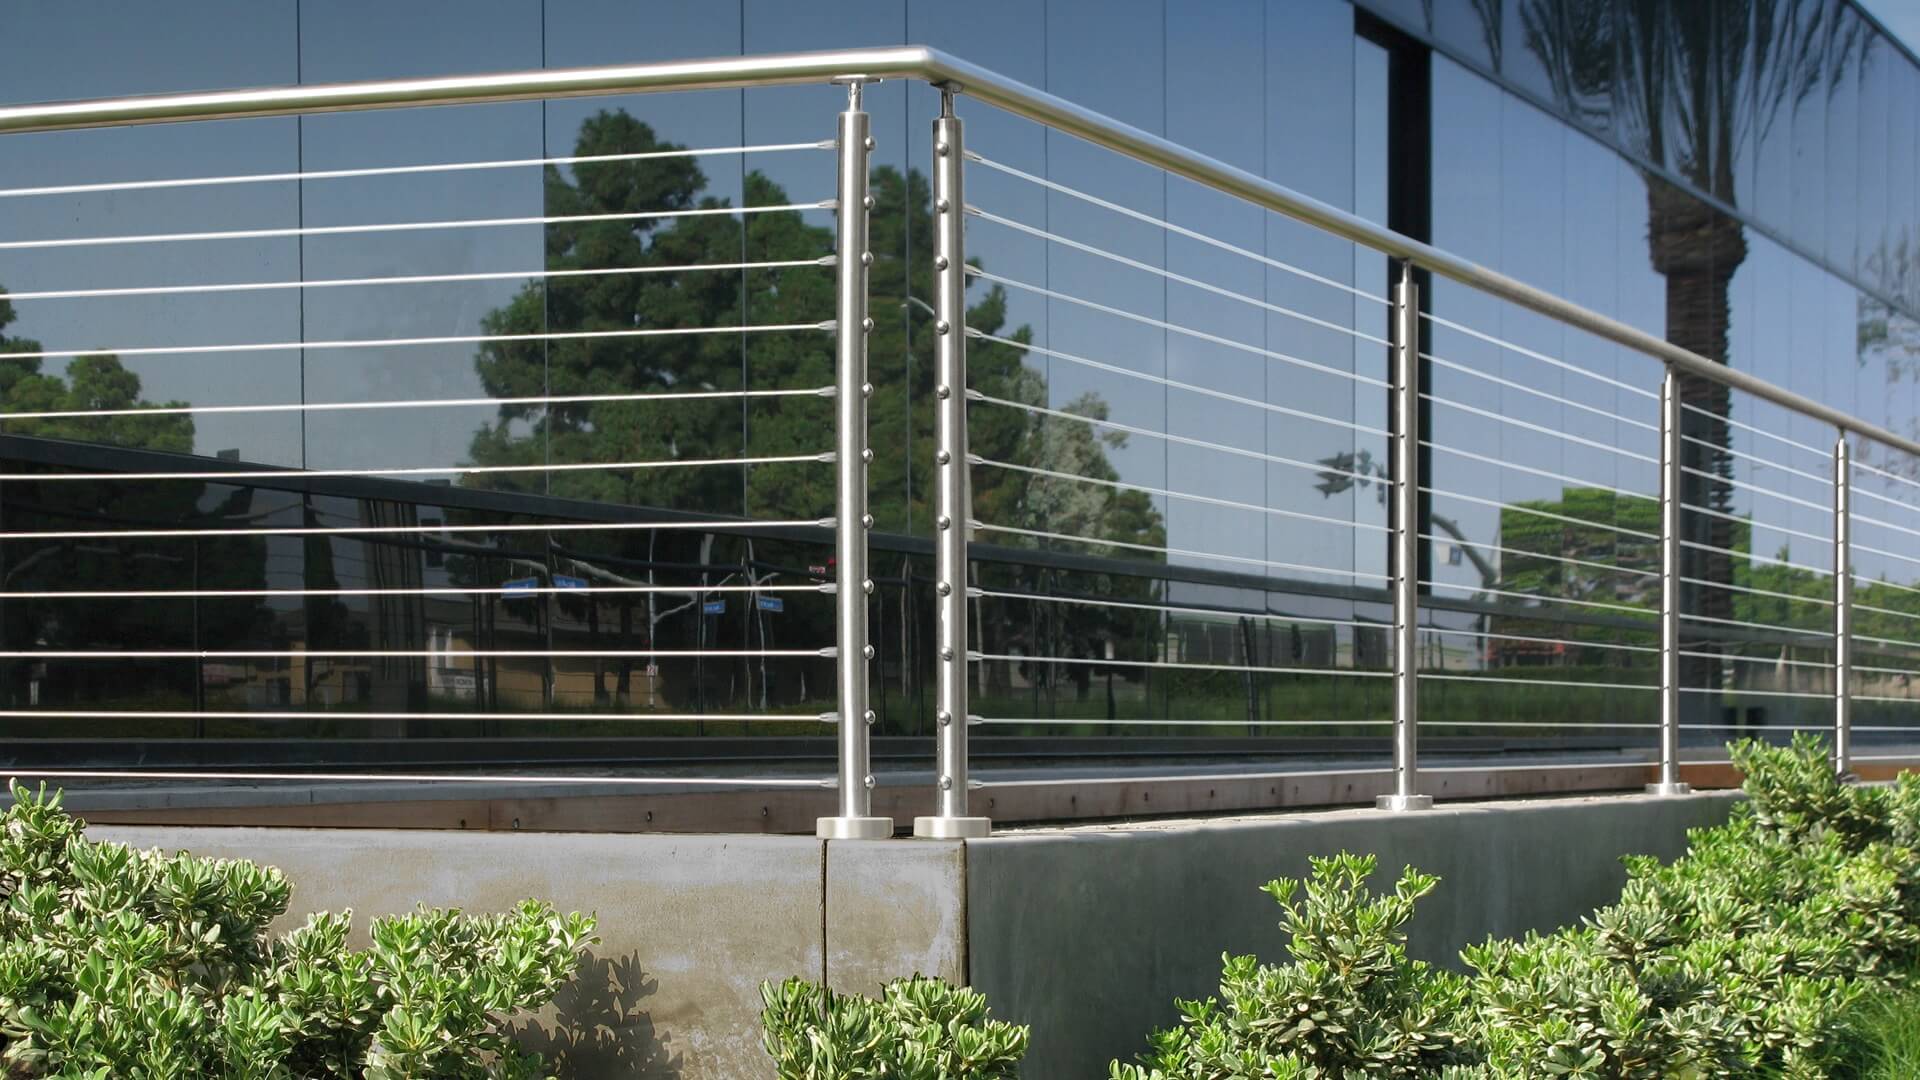 Design/Architecture,Railings,CableRailing,StainlessSteelRailing